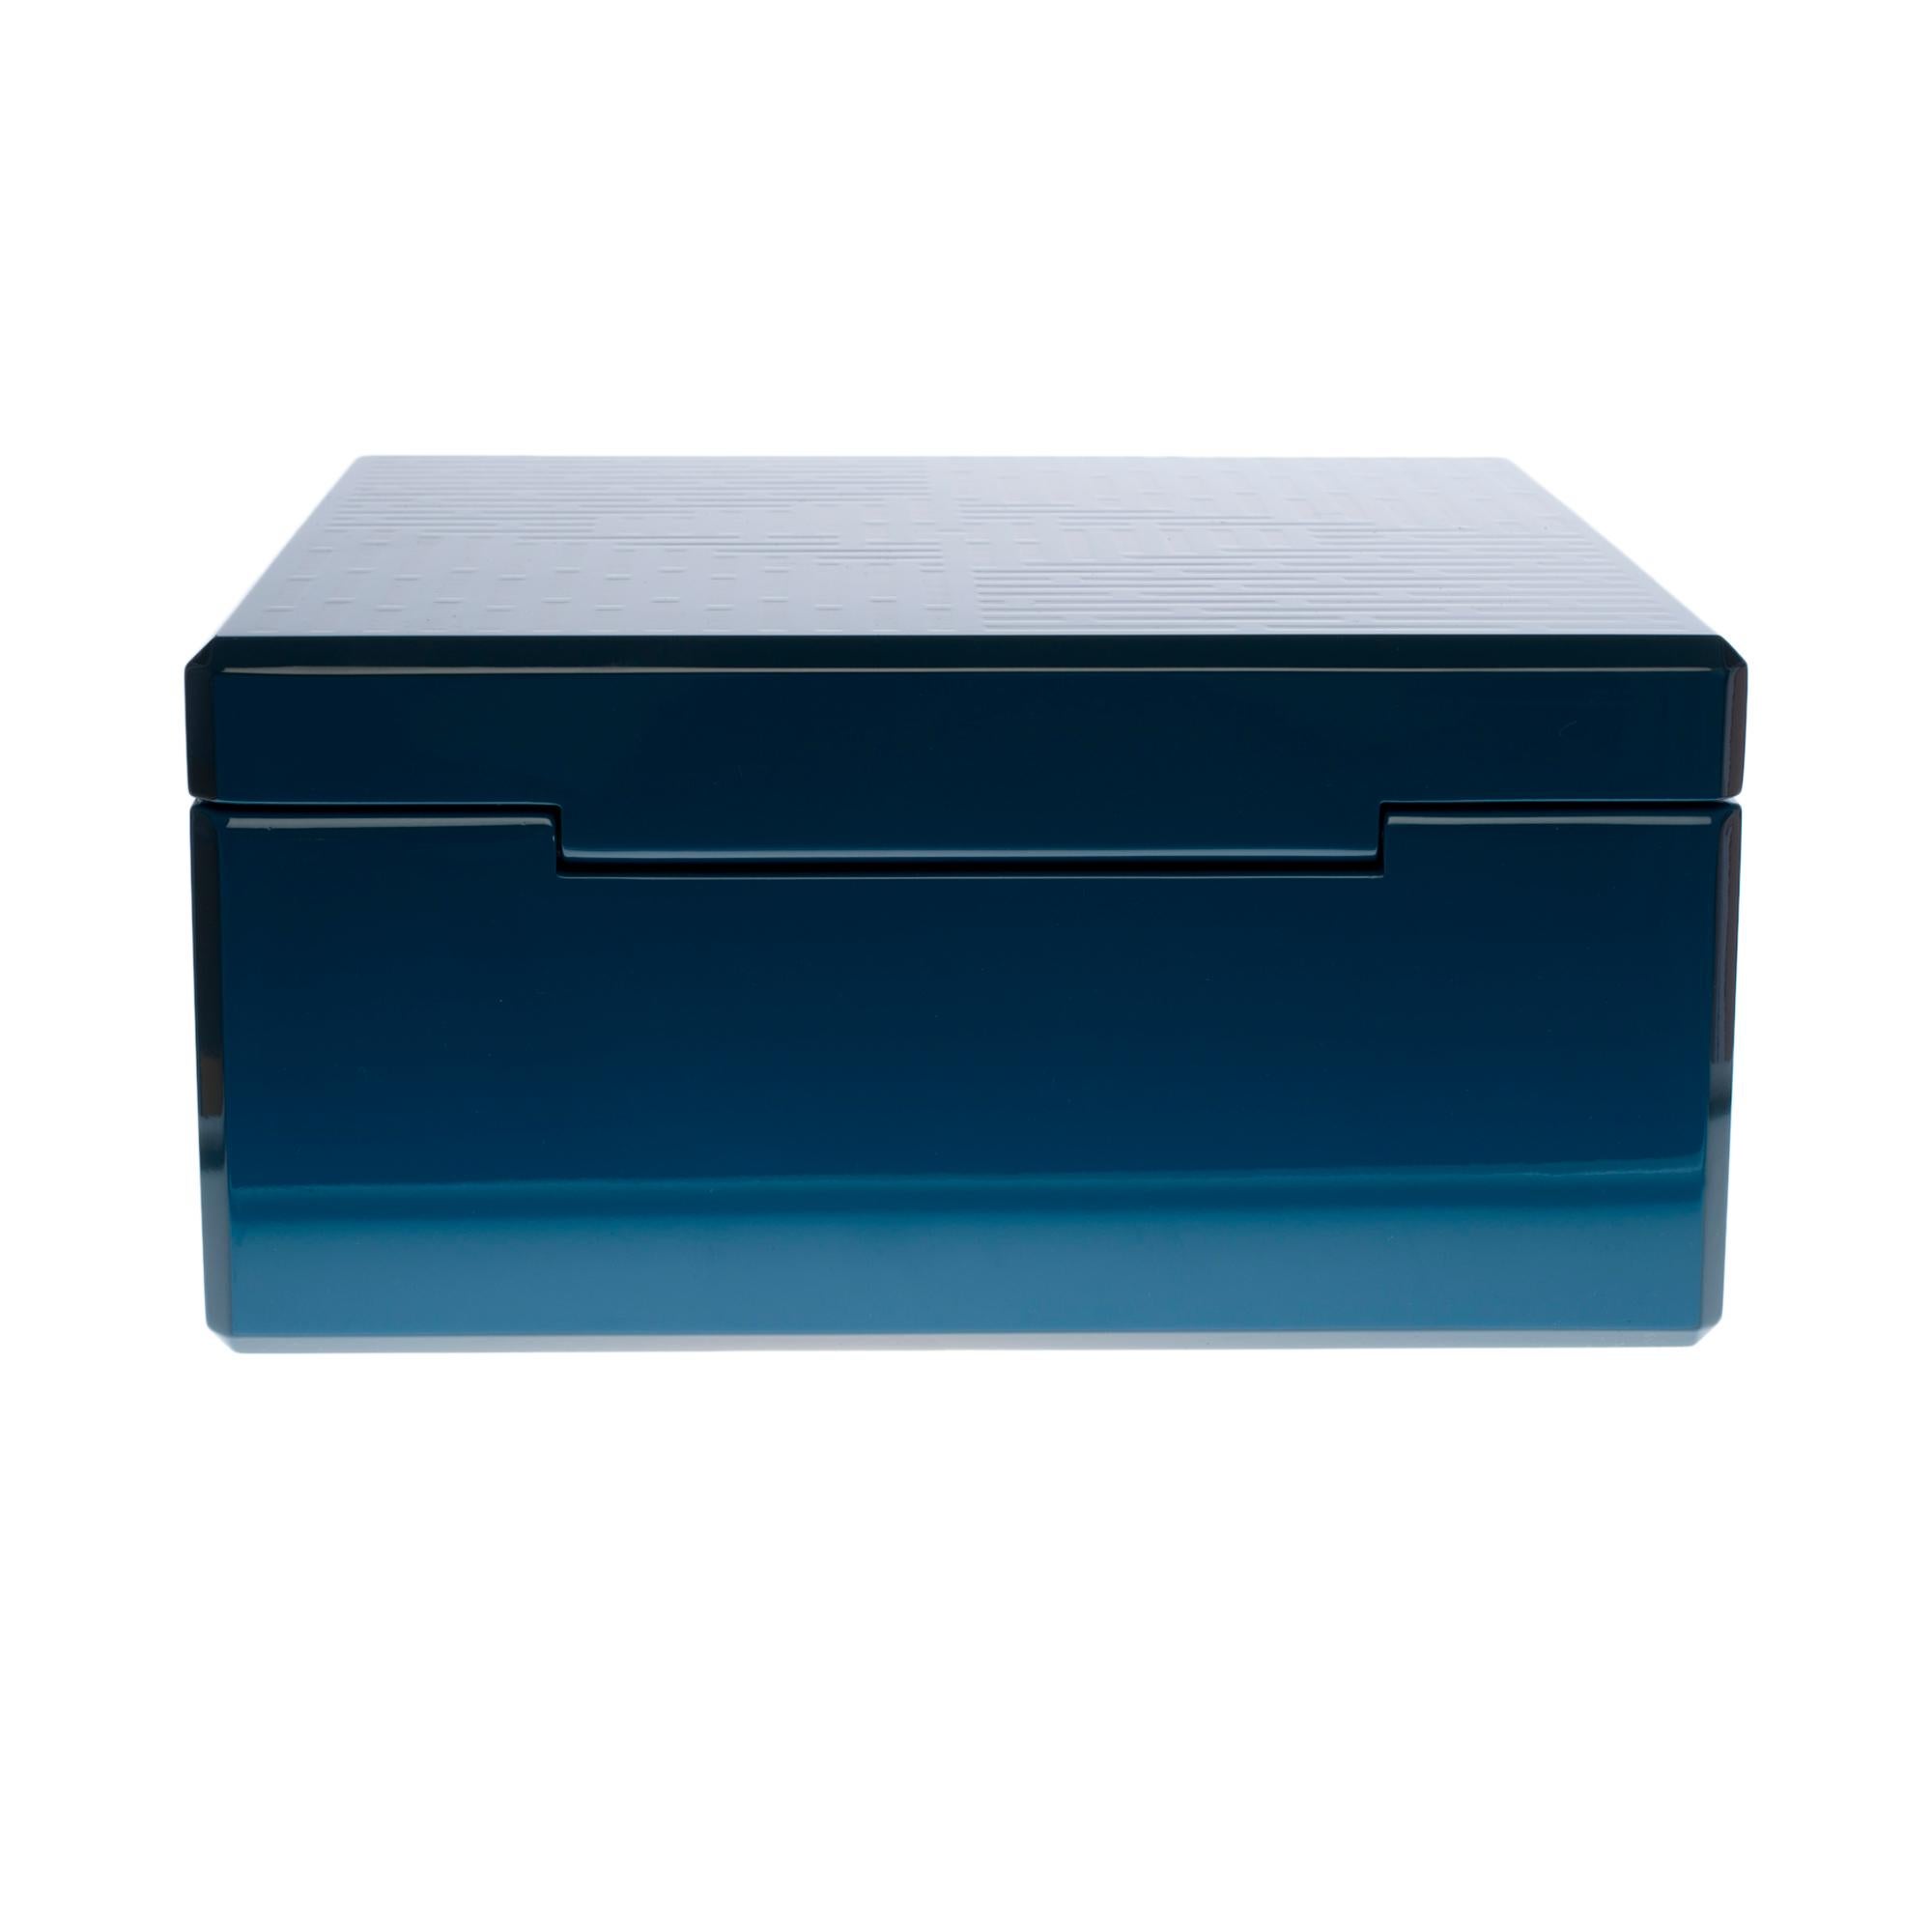 Stunning Blue laser-engraved lacquered wooden jewelry and accessories case
Two removable trays wrapped with velvet goat in Italy
Can contain jewelry, watches, cufflinks and other accessories with 5 compartments on the 1st tray and 4 on the